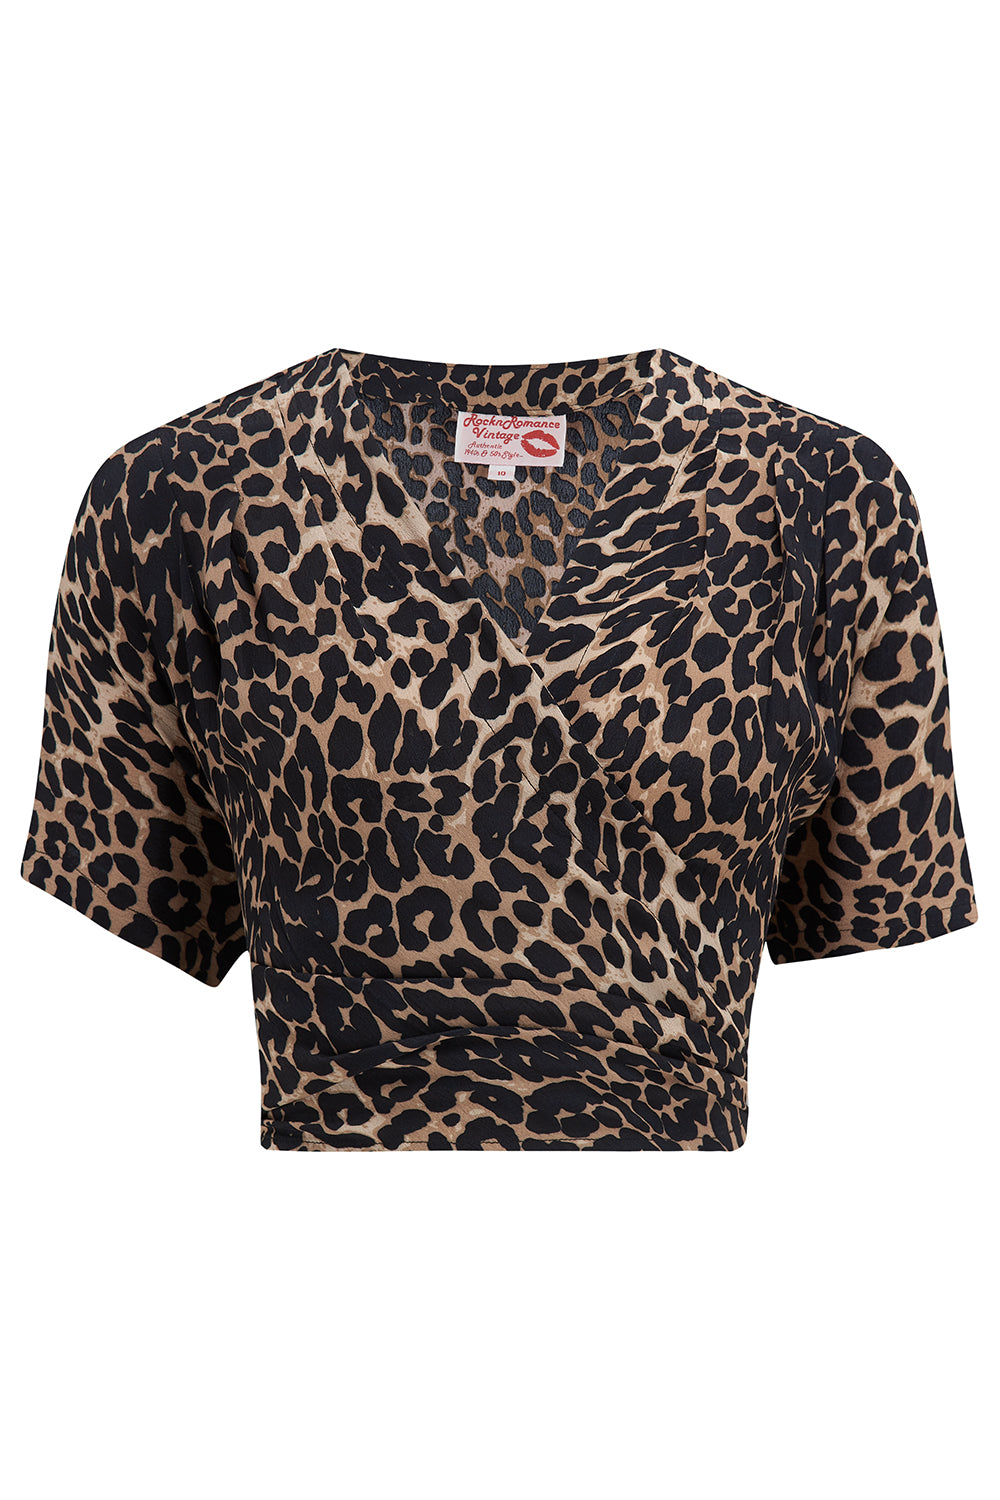 The "Darla" Short Sleeve Wrap Blouse in Leopard Print, True Vintage Style - True and authentic vintage style clothing, inspired by the Classic styles of CC41 , WW2 and the fun 1950s RocknRoll era, for everyday wear plus events like Goodwood Revival, Twinwood Festival and Viva Las Vegas Rockabilly Weekend Rock n Romance Rock n Romance